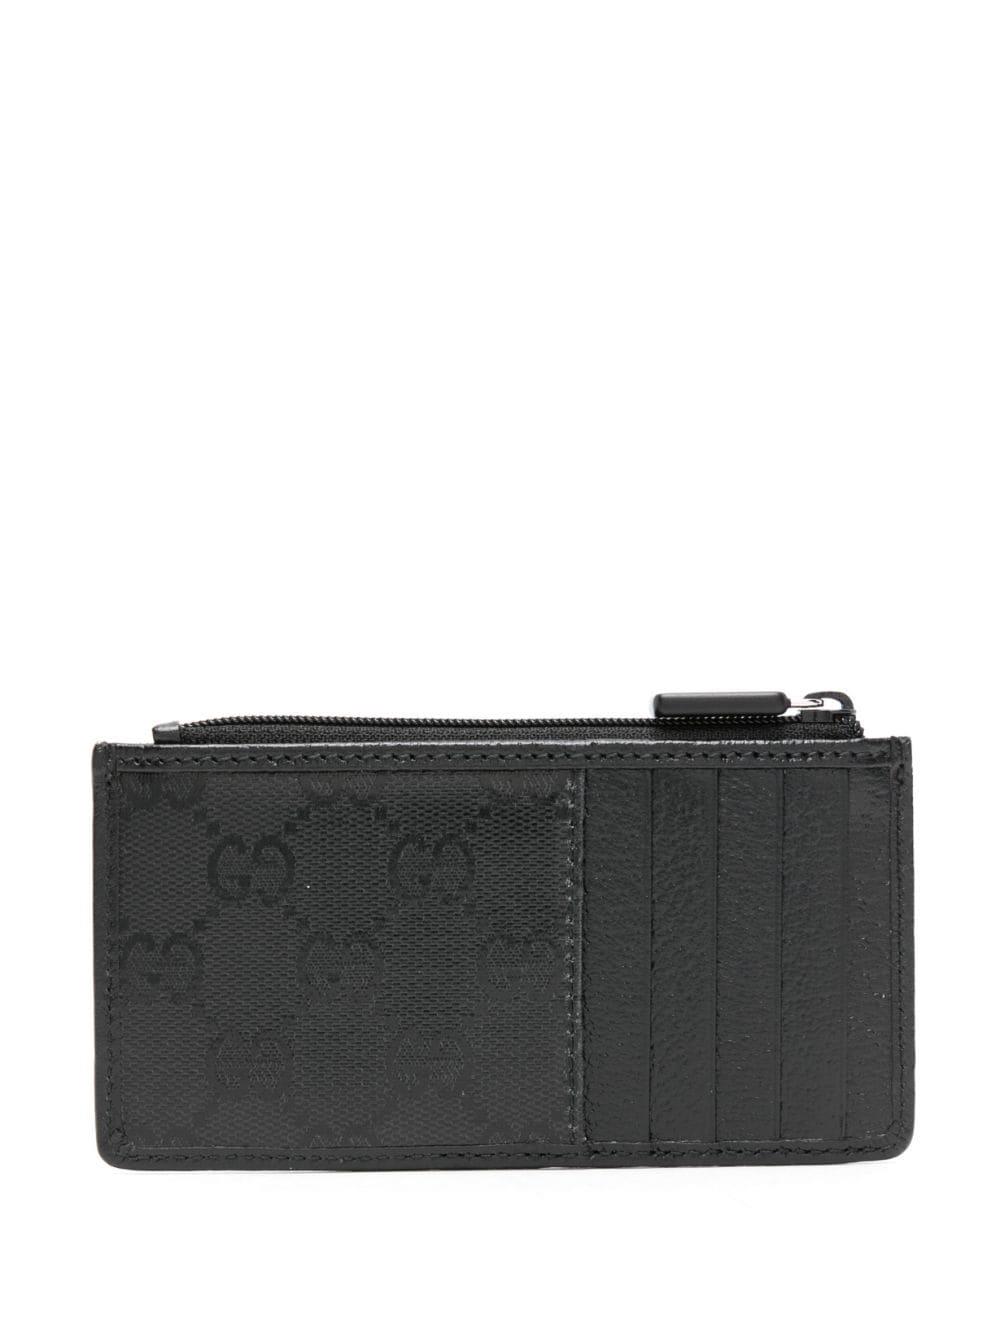 Gucci Double G leather cardholder - Black